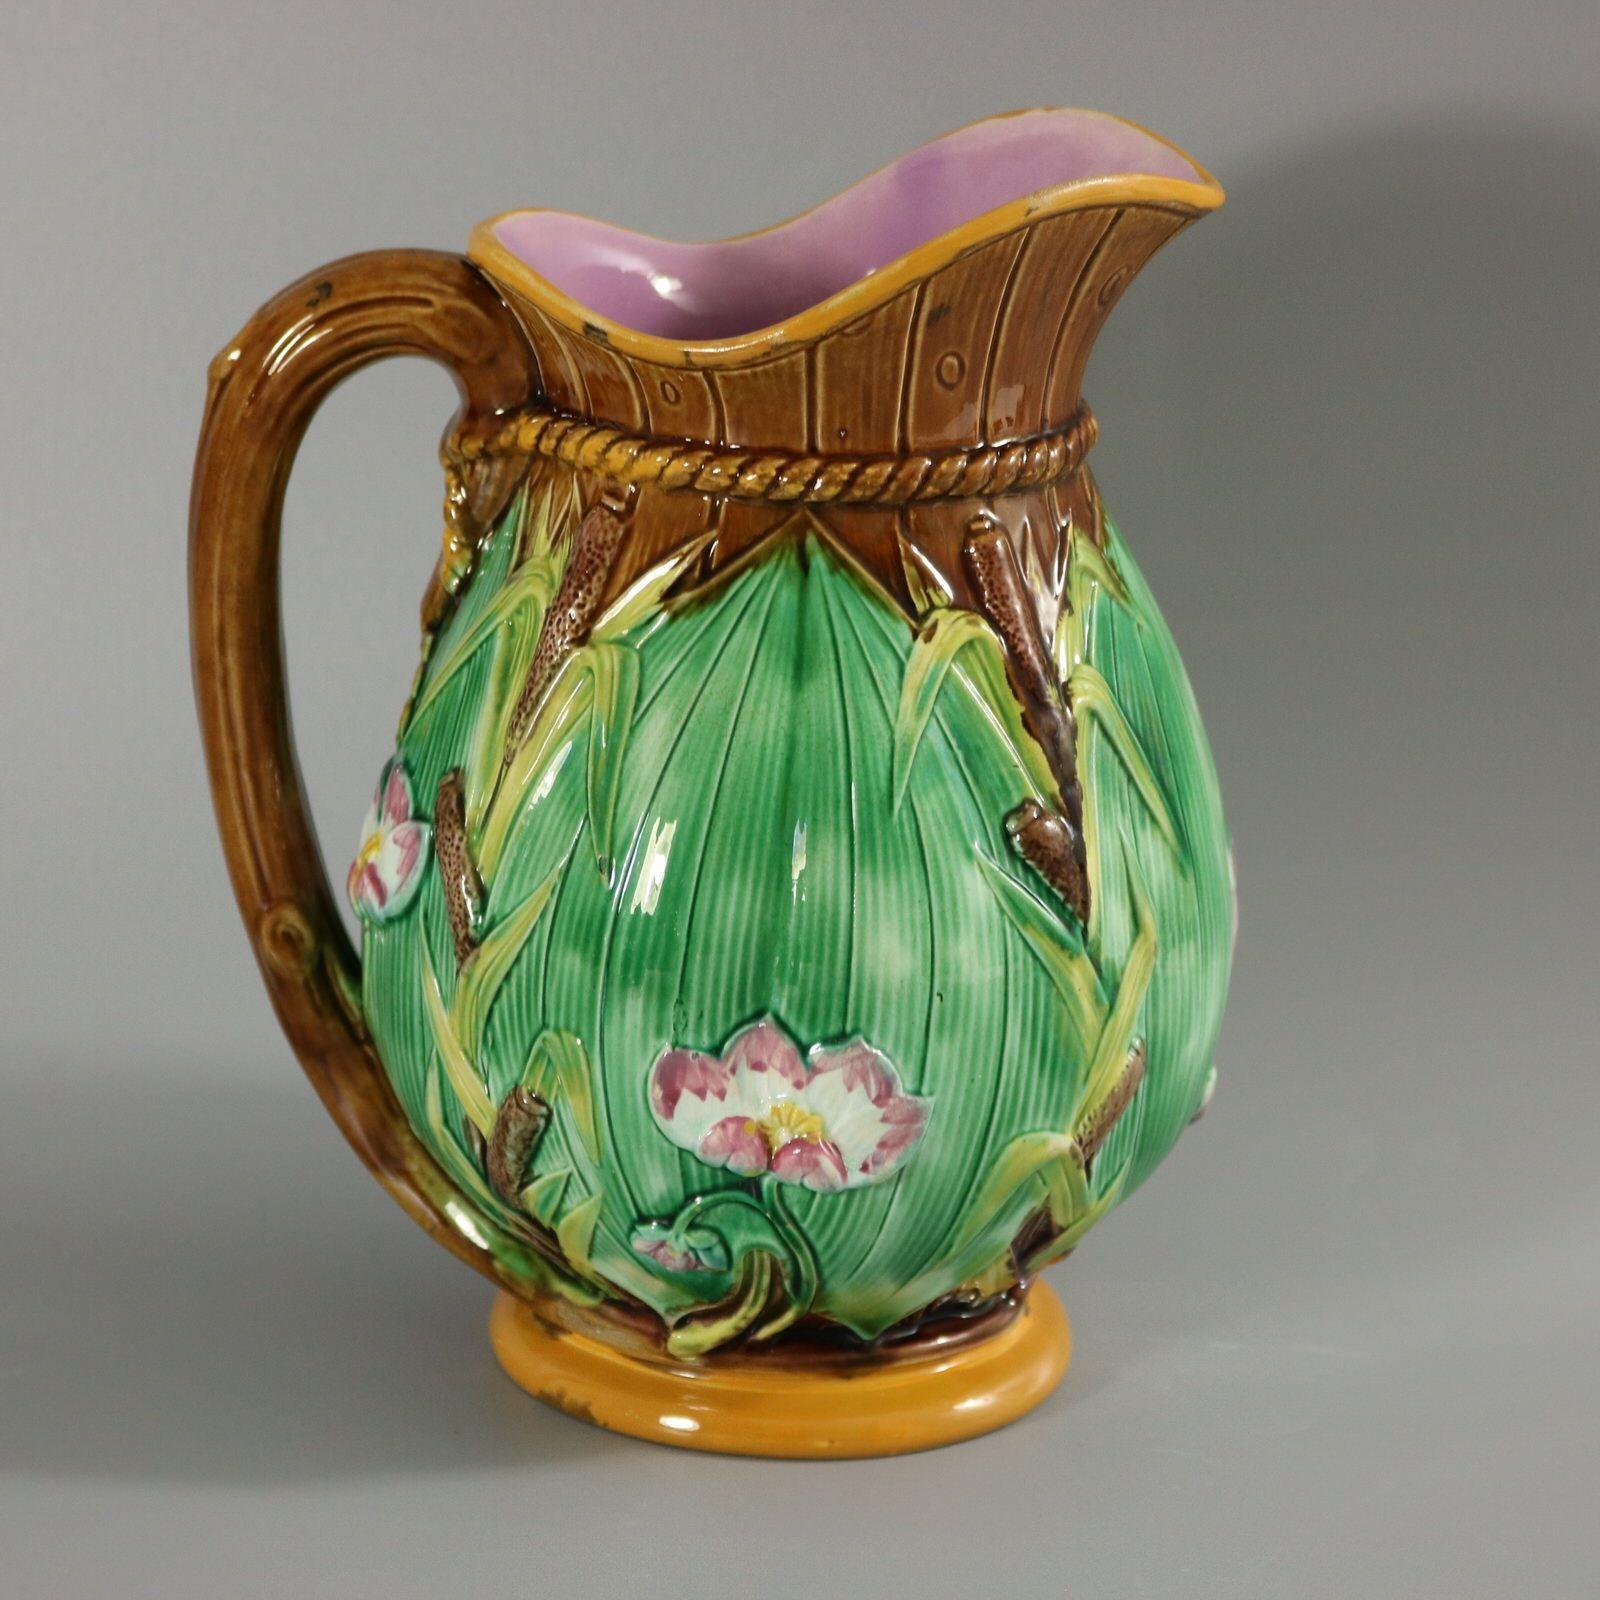 George Jones Majolica Bulrush and Lily Jug/Pitcher In Good Condition For Sale In Chelmsford, Essex